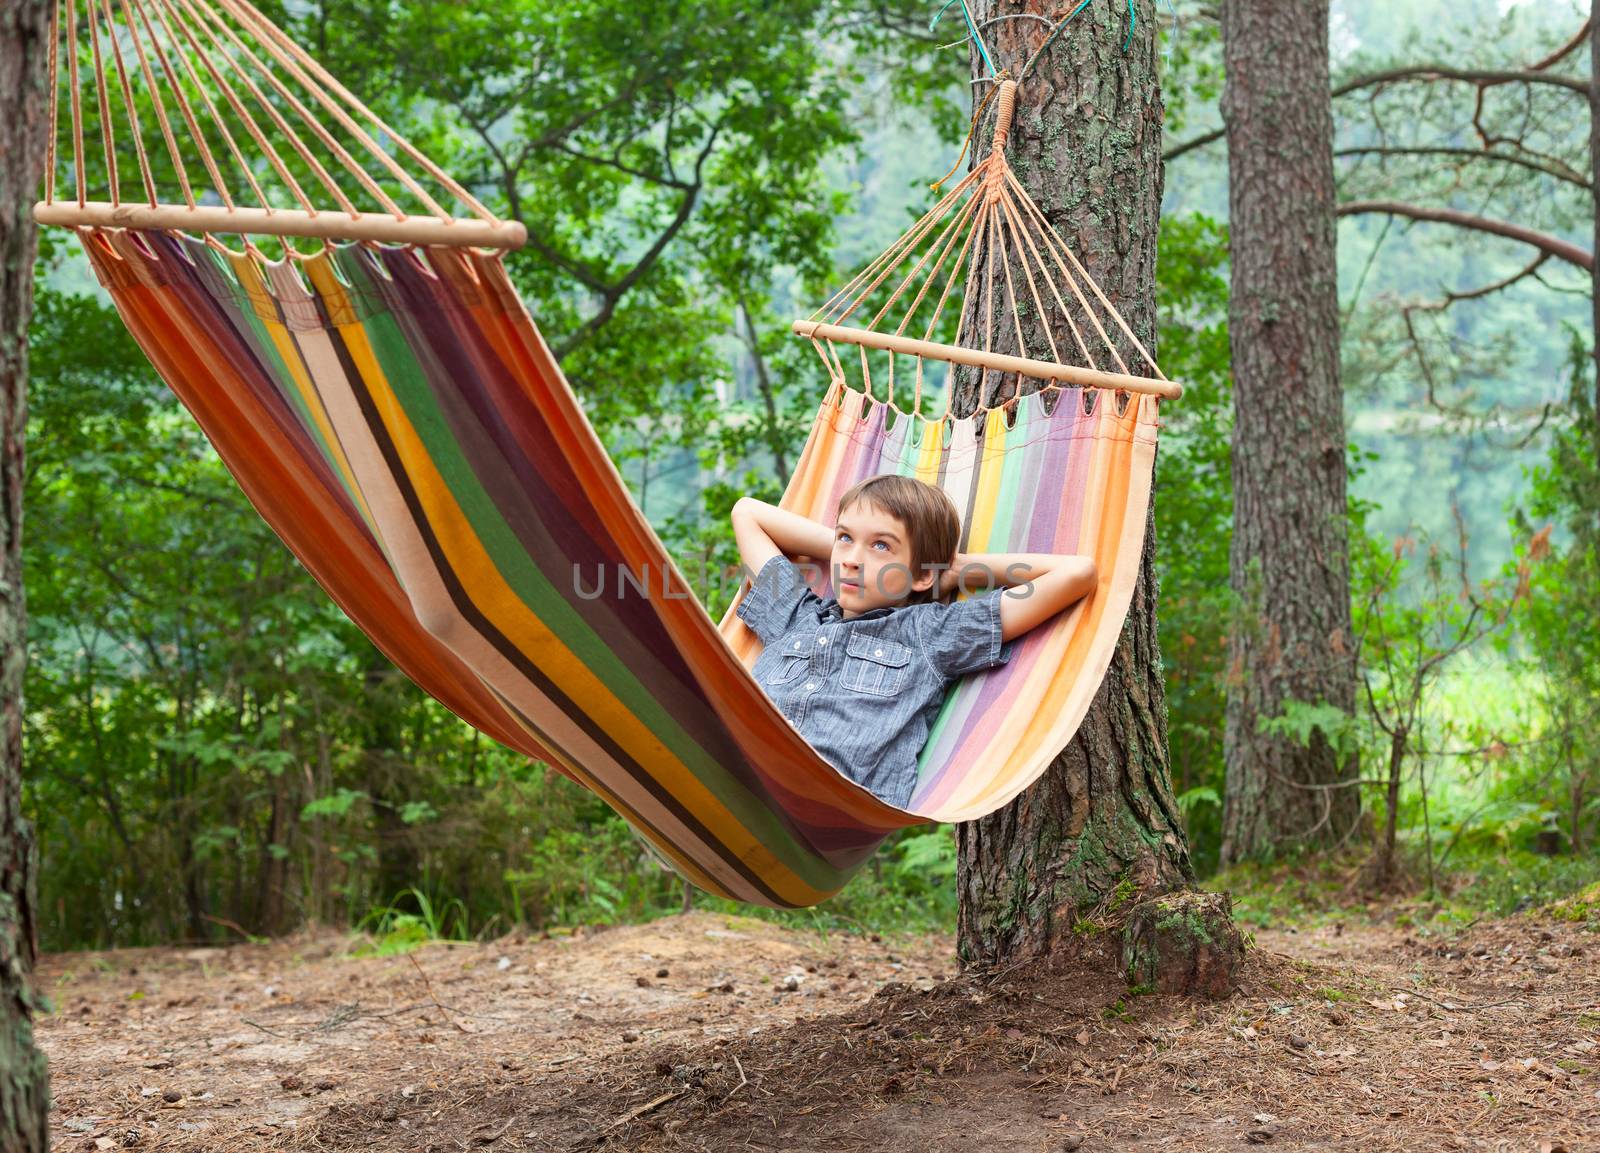 Child in hammock outdoors by naumoid